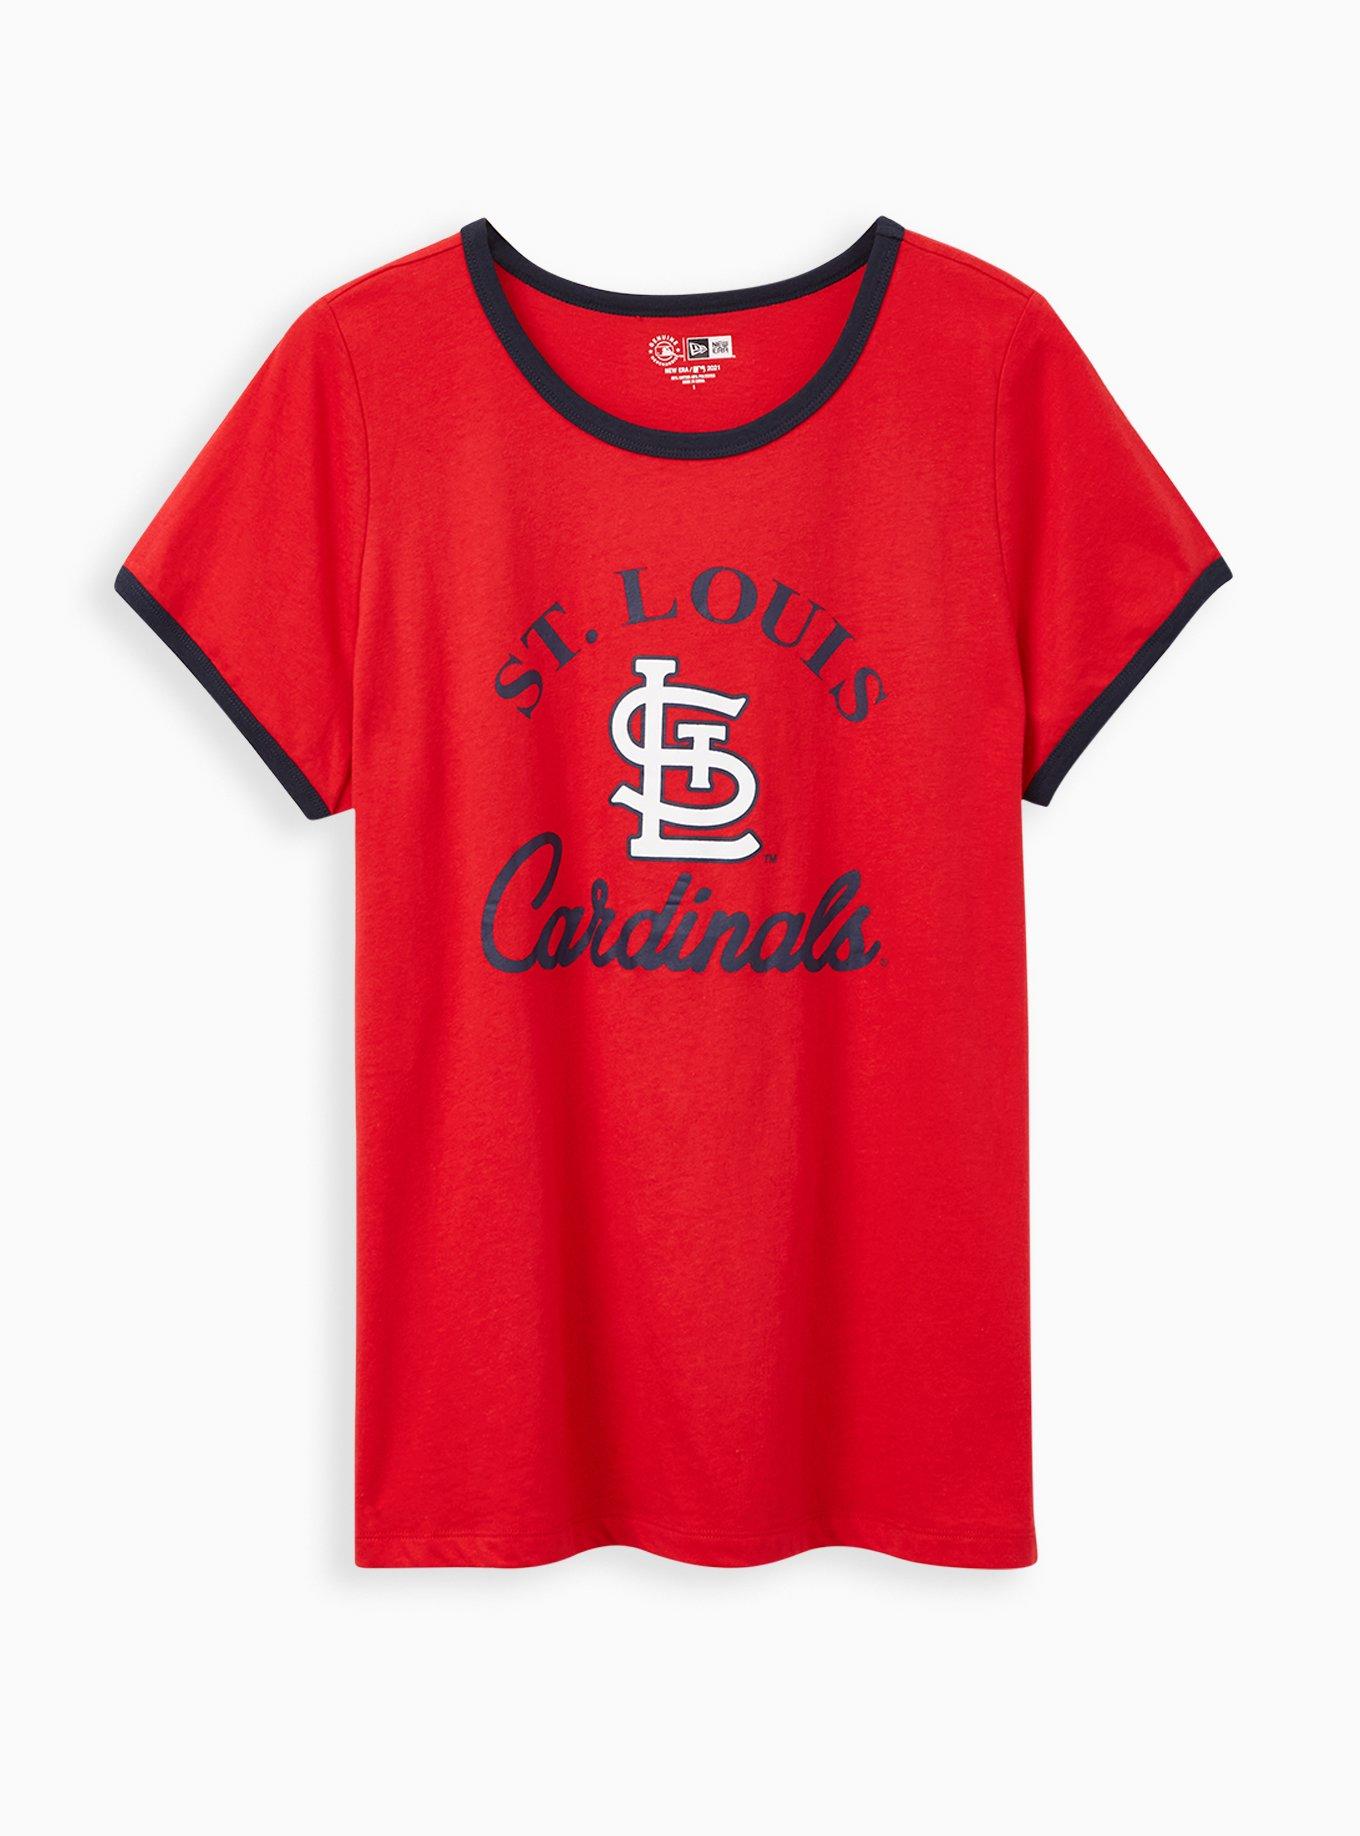 Plus Size - Classic Fit Ringer Tee - MLB St. Louis Cardinals Red - Torrid